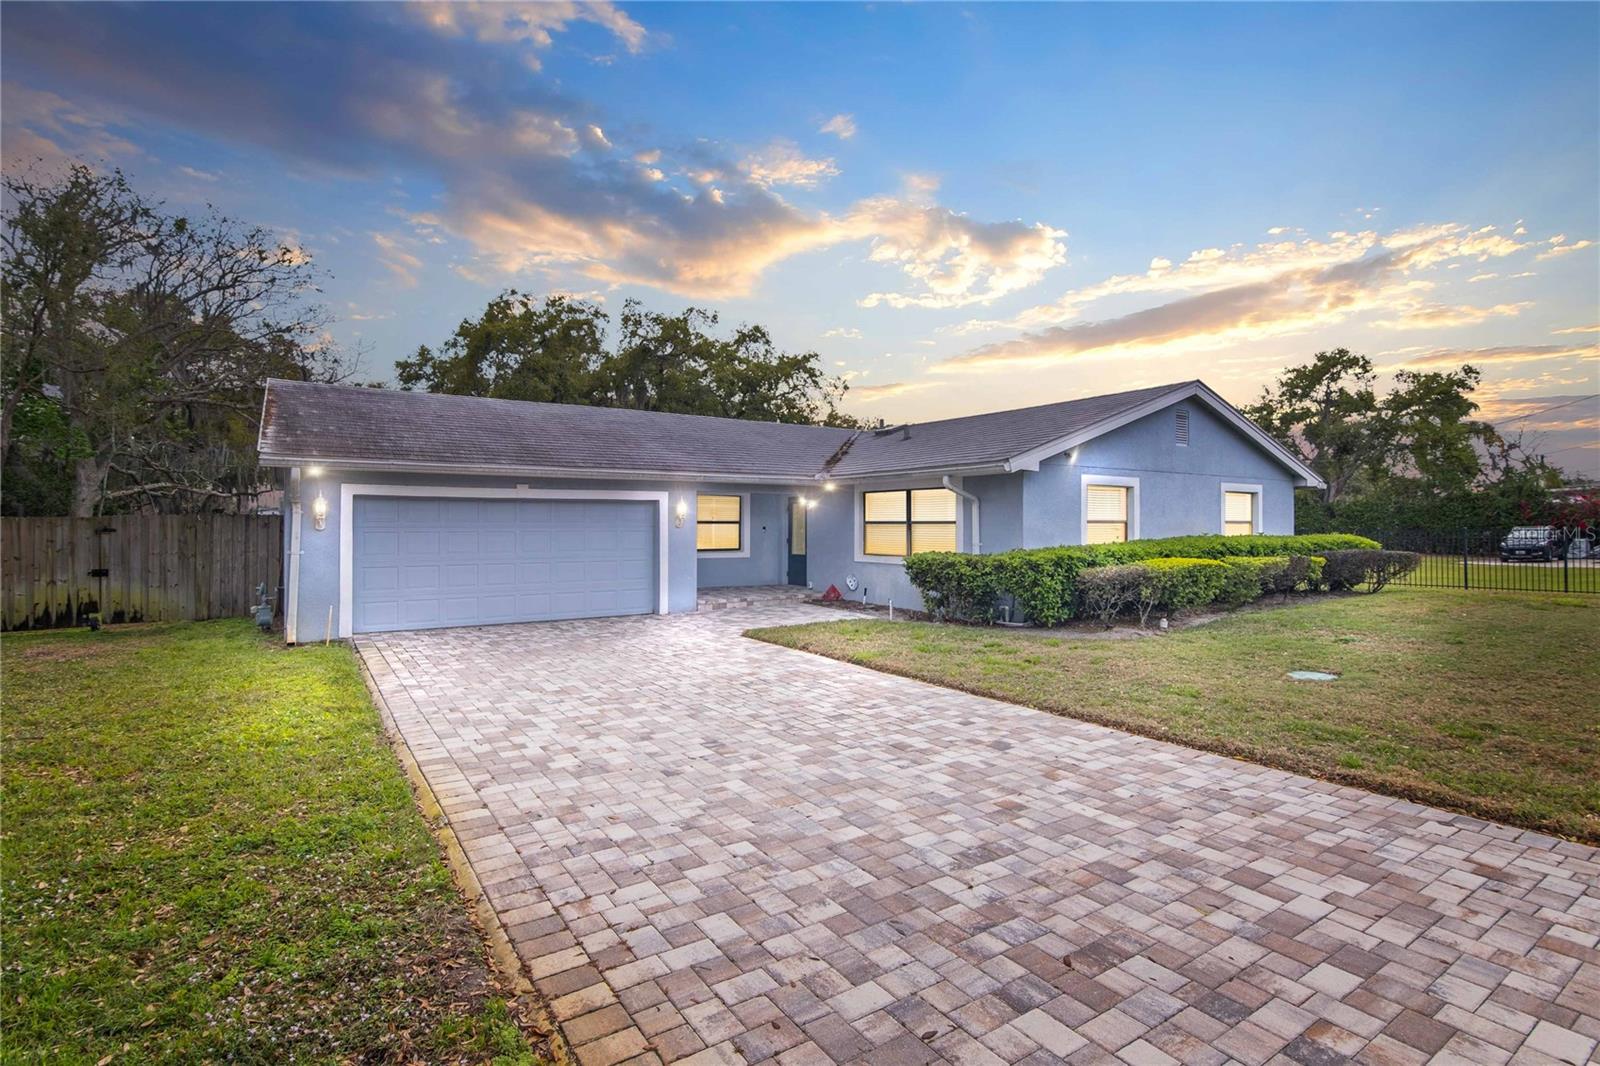 6526 SAWYER SHORES LN, 4 Bedrooms Bedrooms, ,2 BathroomsBathrooms,Residential,For Sale,SAWYER SHORES LN,MFRO6184449